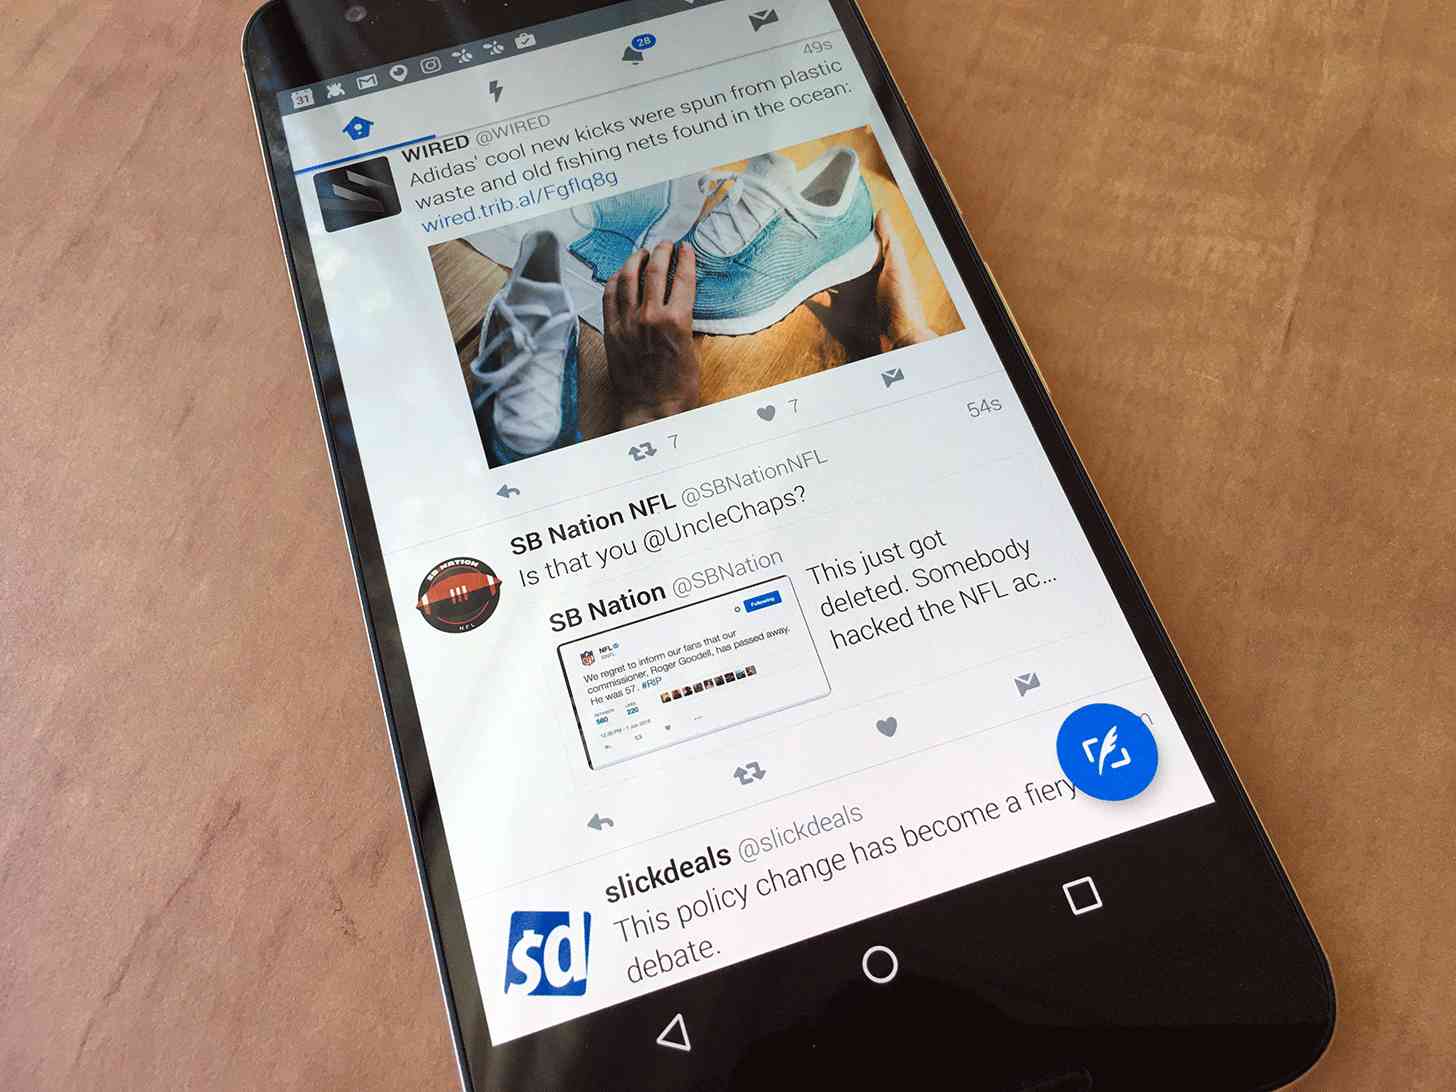 Twitter for Android app refresh design